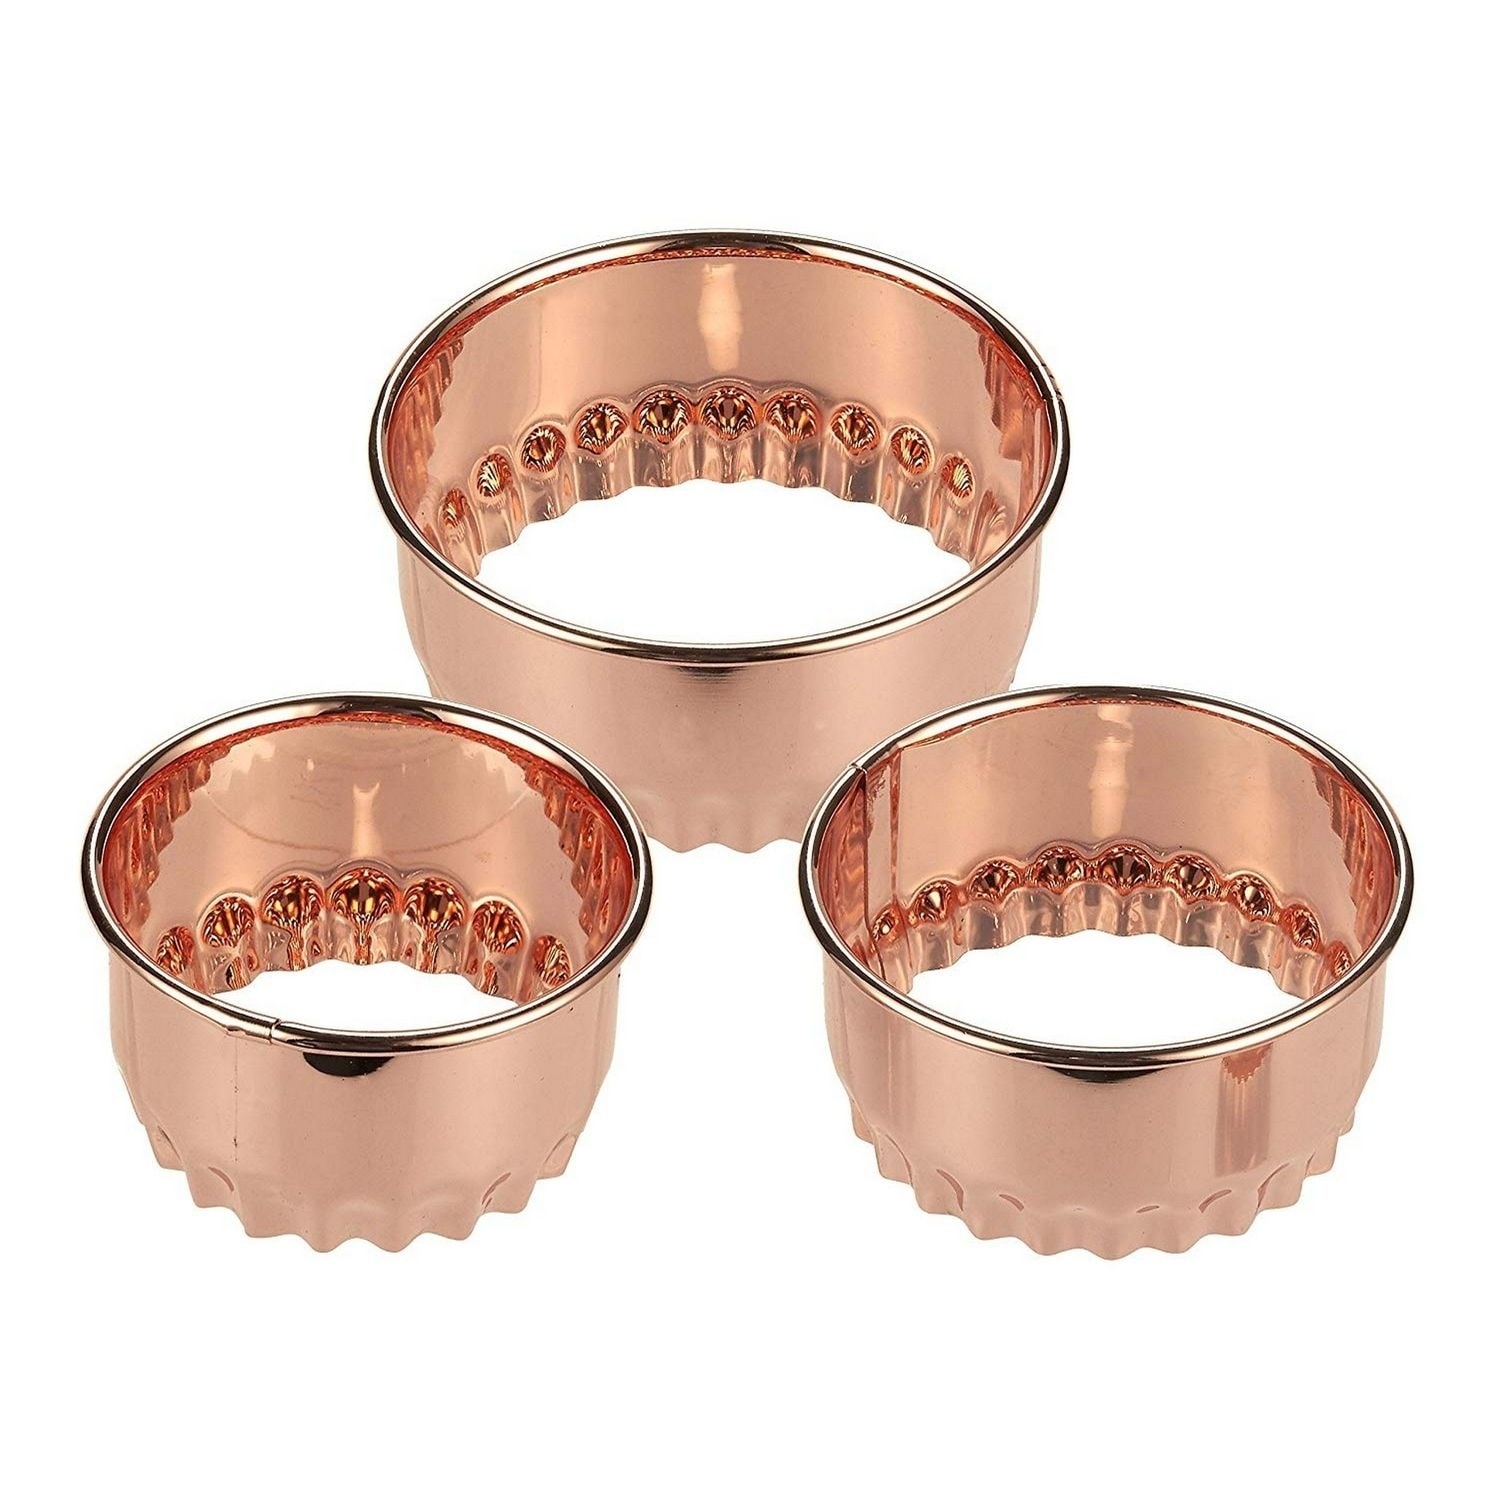 https://ak1.ostkcdn.com/images/products/30123857/Copper-Cookie-Cutters-Set-3PC-Crinkle-Fluted-Edge-for-Pastries-Baking-Desserts-e24d76a3-e4b4-4f5c-885e-48b1f47fb98e.jpg